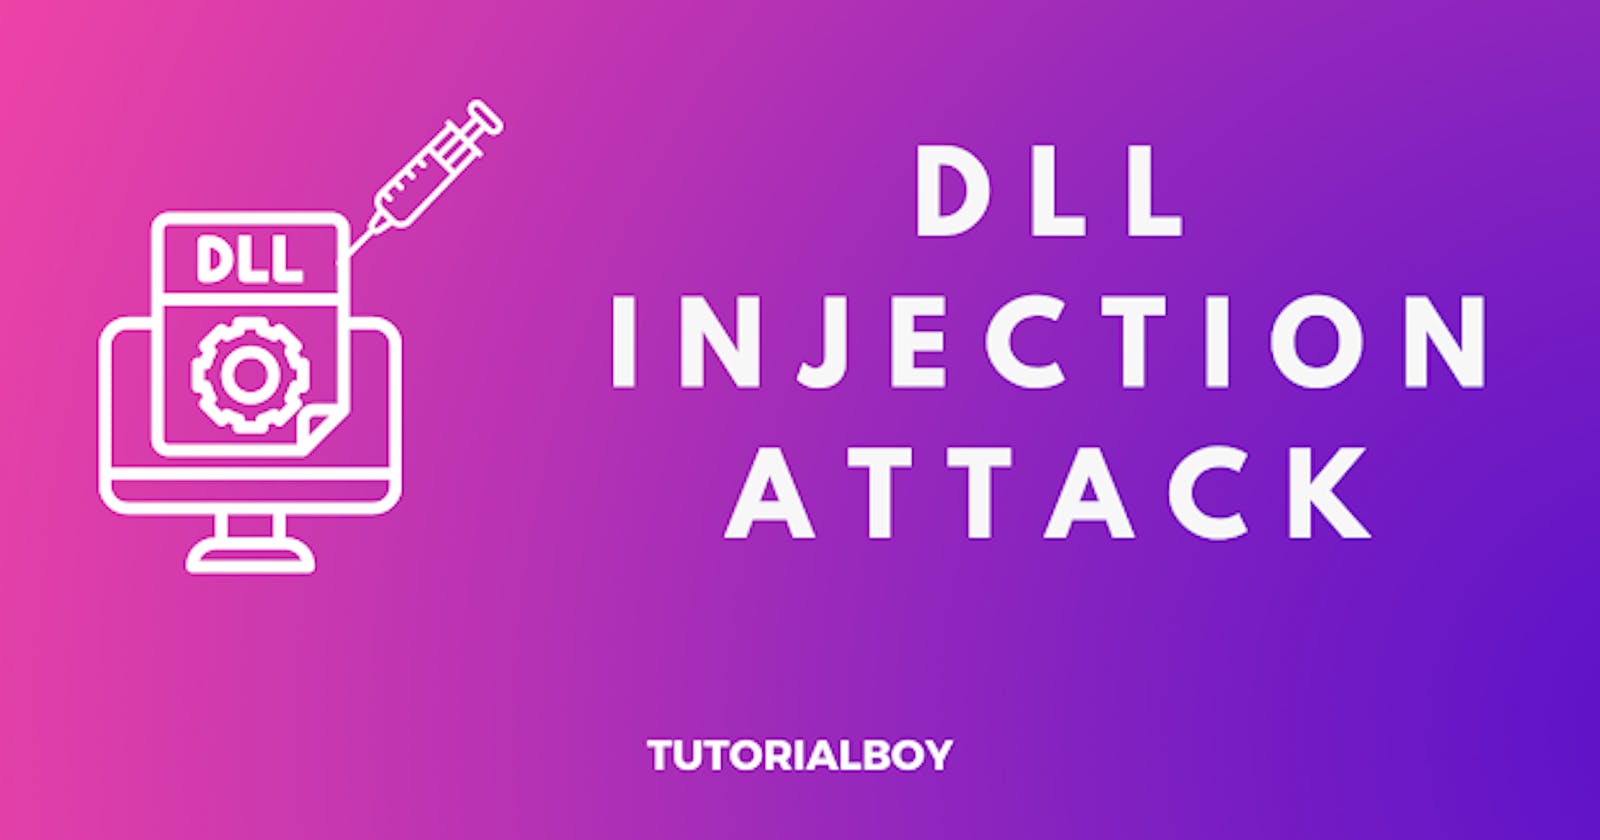 A Detail Understanding of DLL Injection Attack